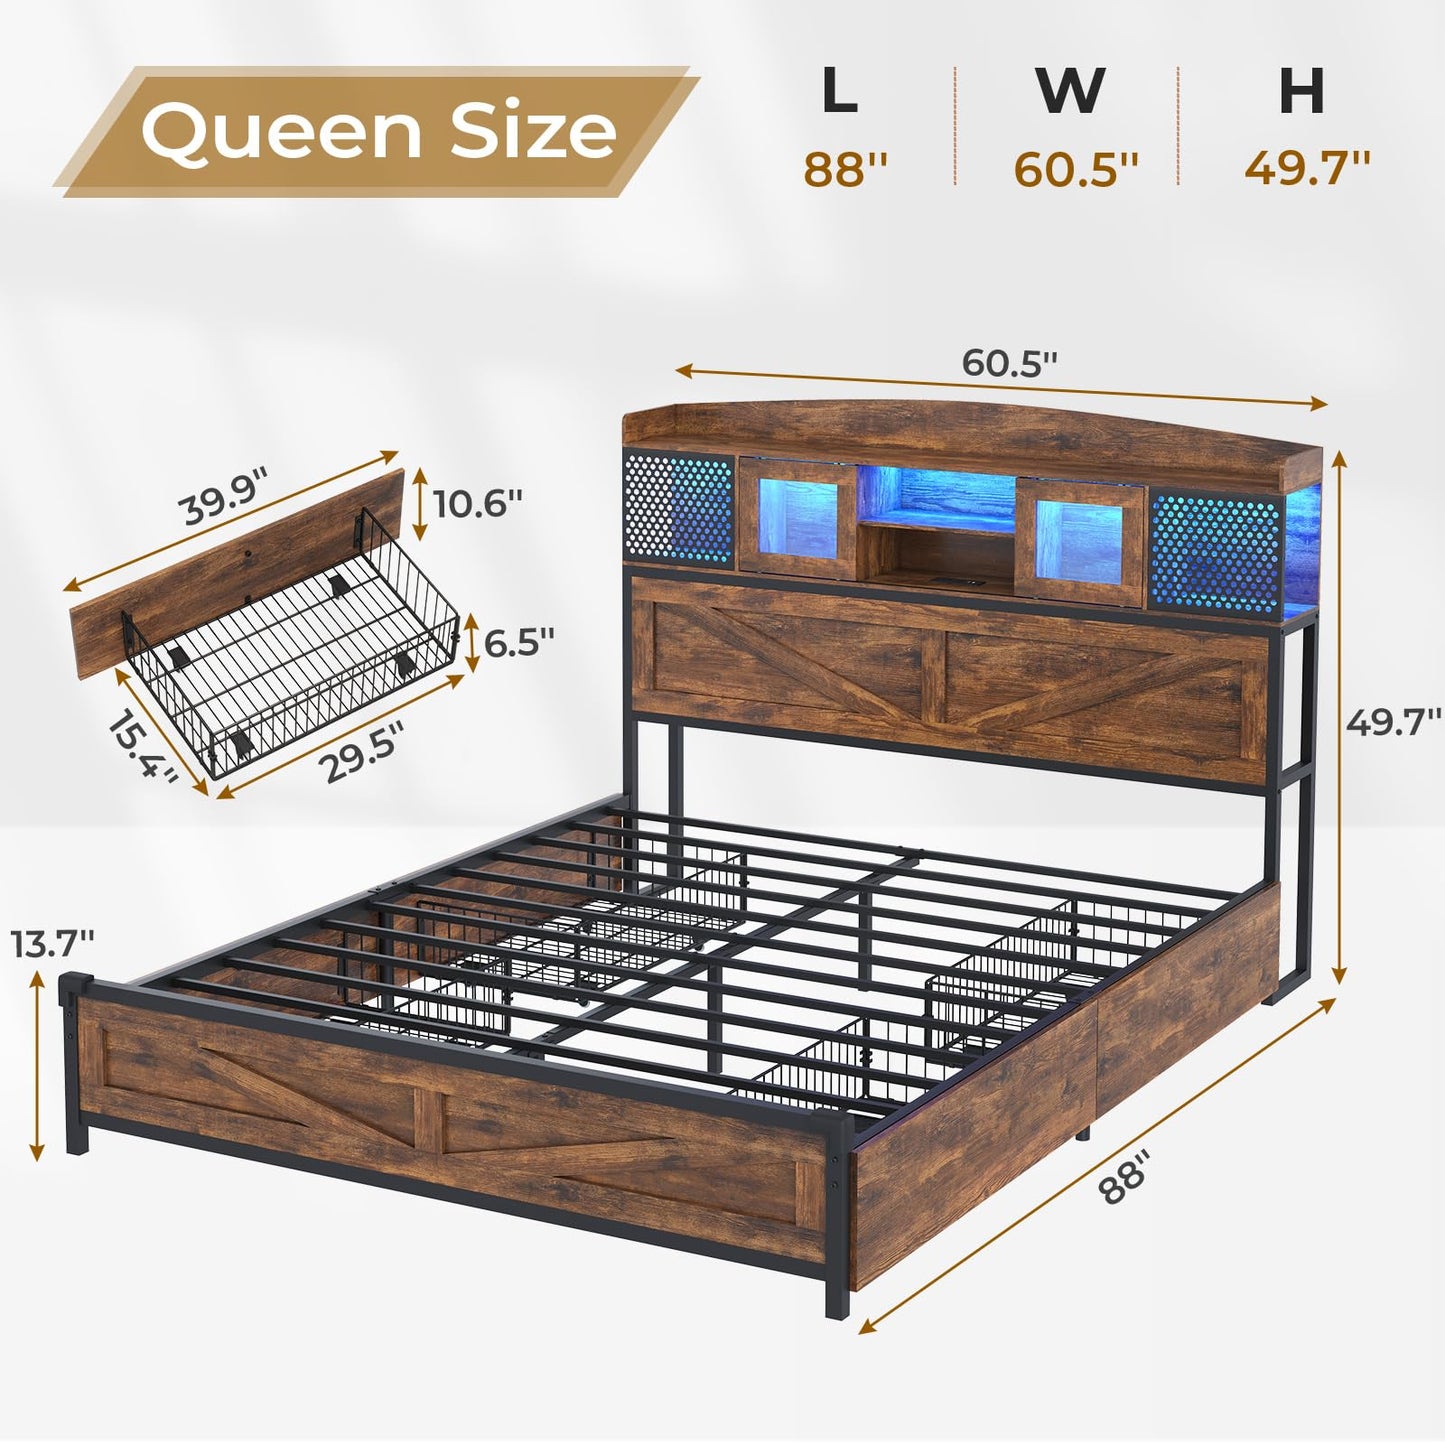 BTHFST Farmhouse Queen Bed Frame with Storage Headboard & 4 Drawers, LED Bed Frame Queen Size with Charging Station, Wood Platform Bed with Metal Slats Support, No Box Spring Needed, Rustic Brown